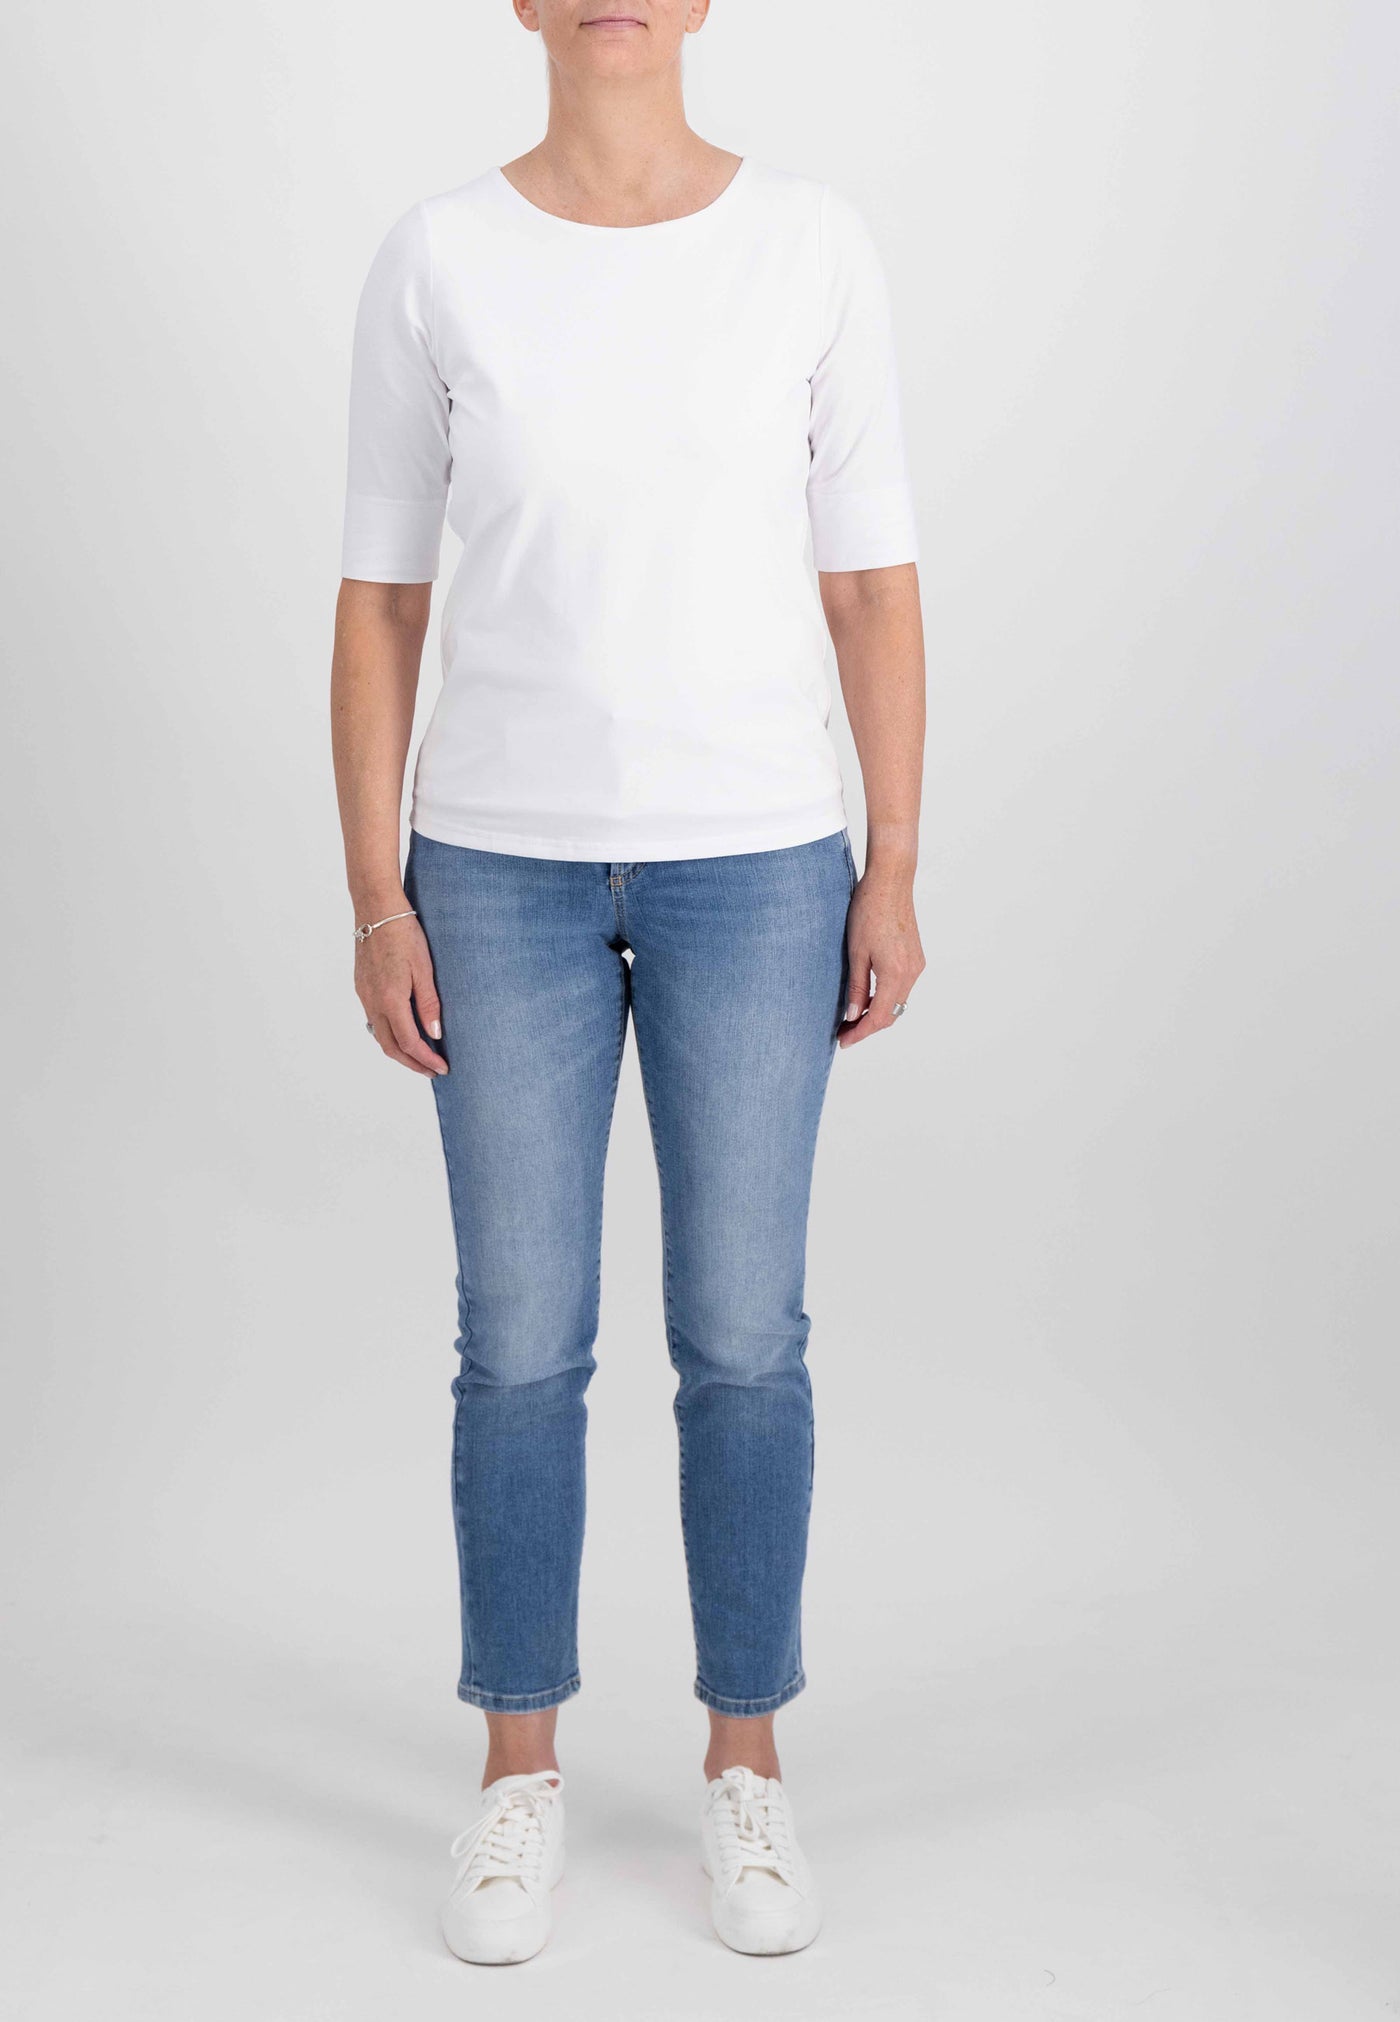 Plain White Top With Half Sleeves